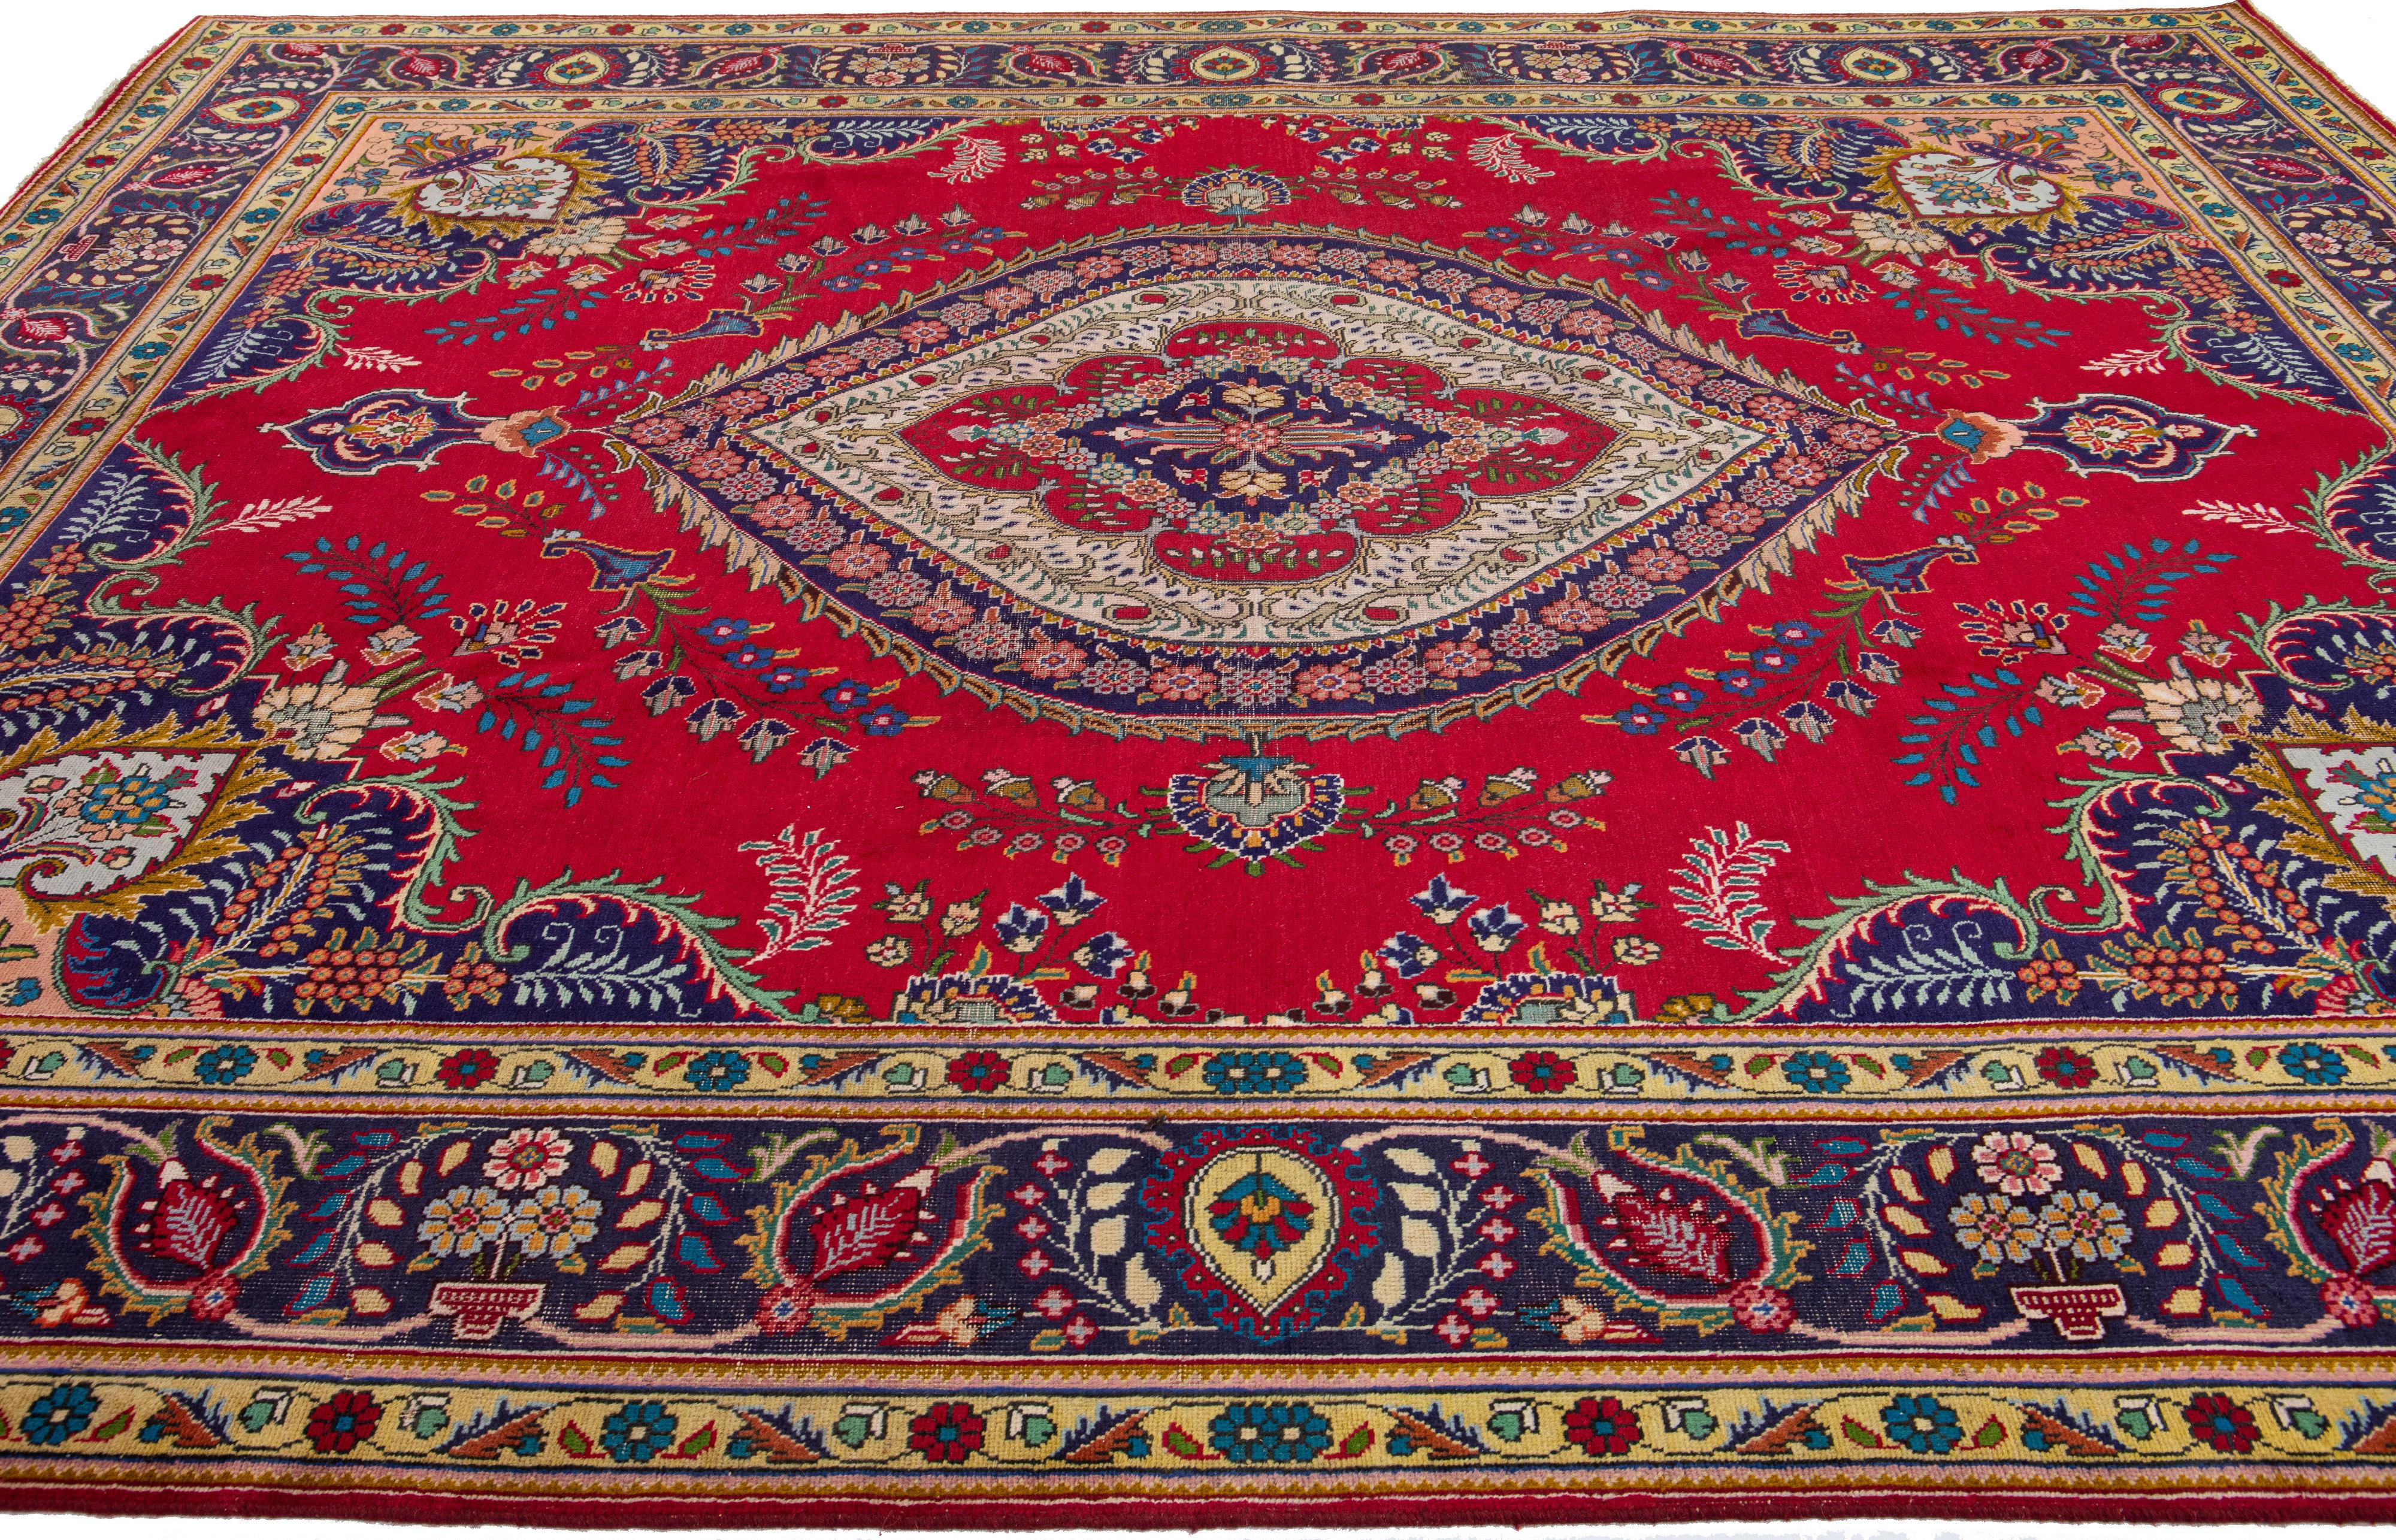 20th Century Red Antique Tabriz Handmade Persian Wool Rug with Multicolor Shah Abbasi Desing For Sale